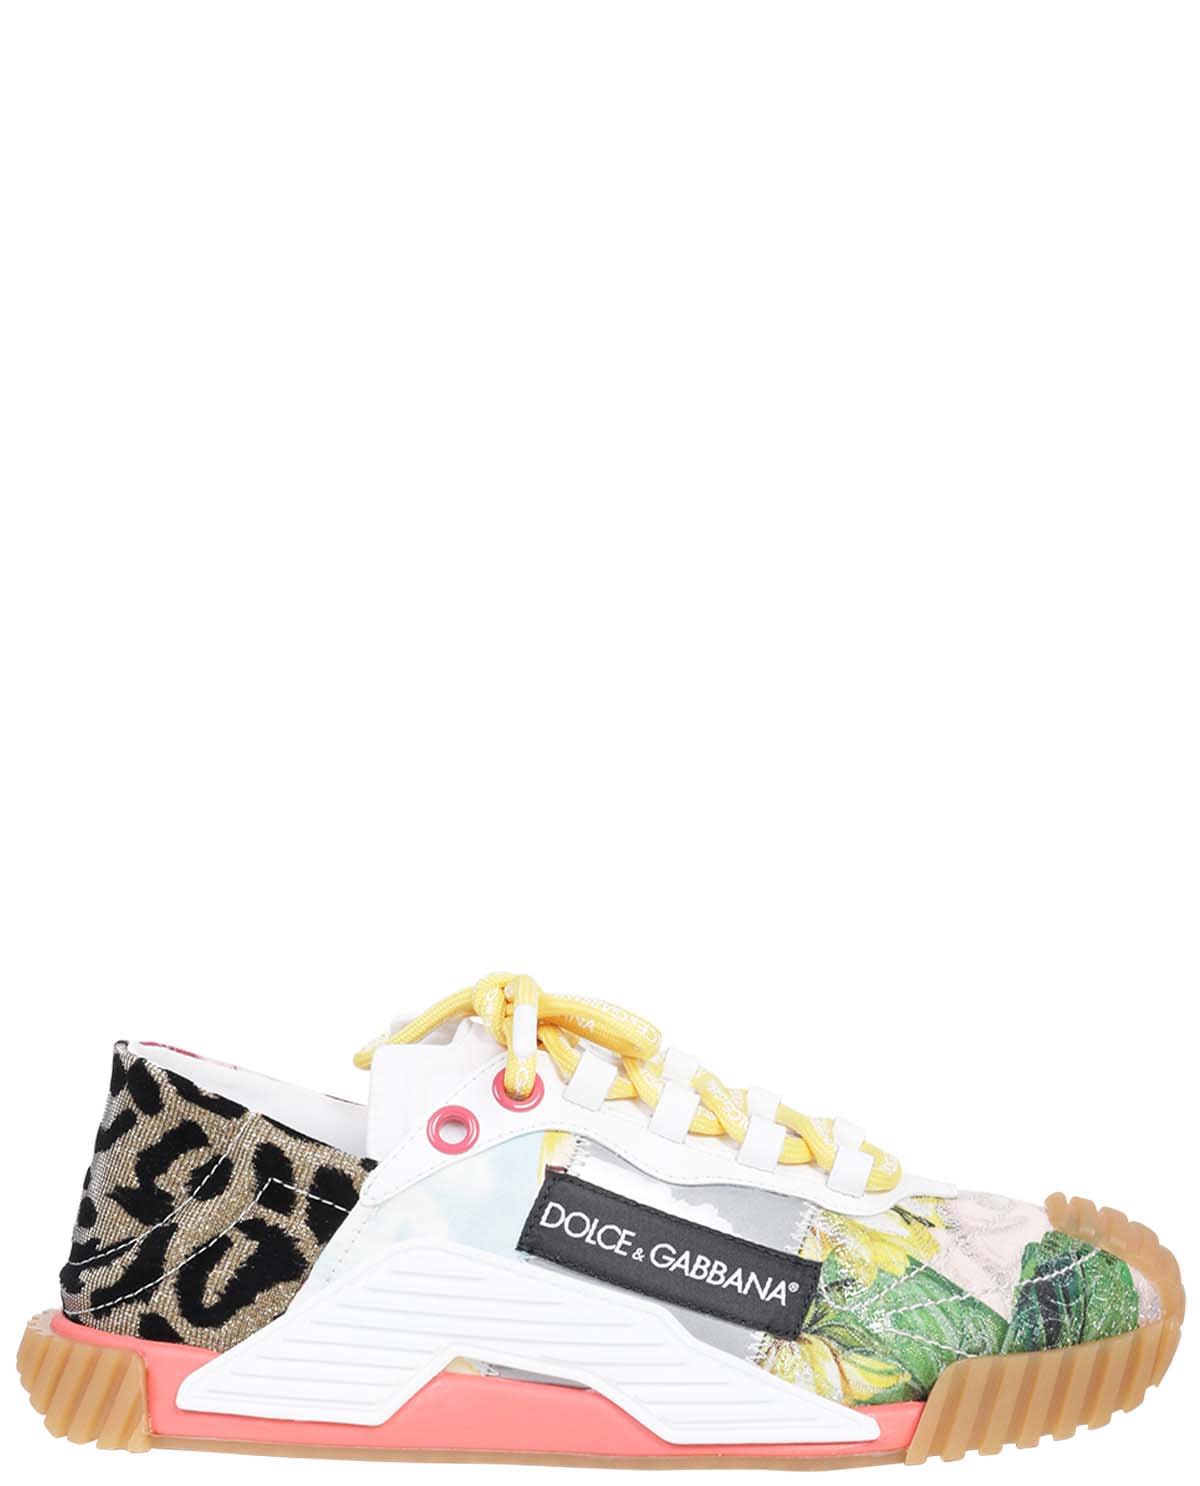 Dolce & Gabbana Patchwork Ns1 Sneakers